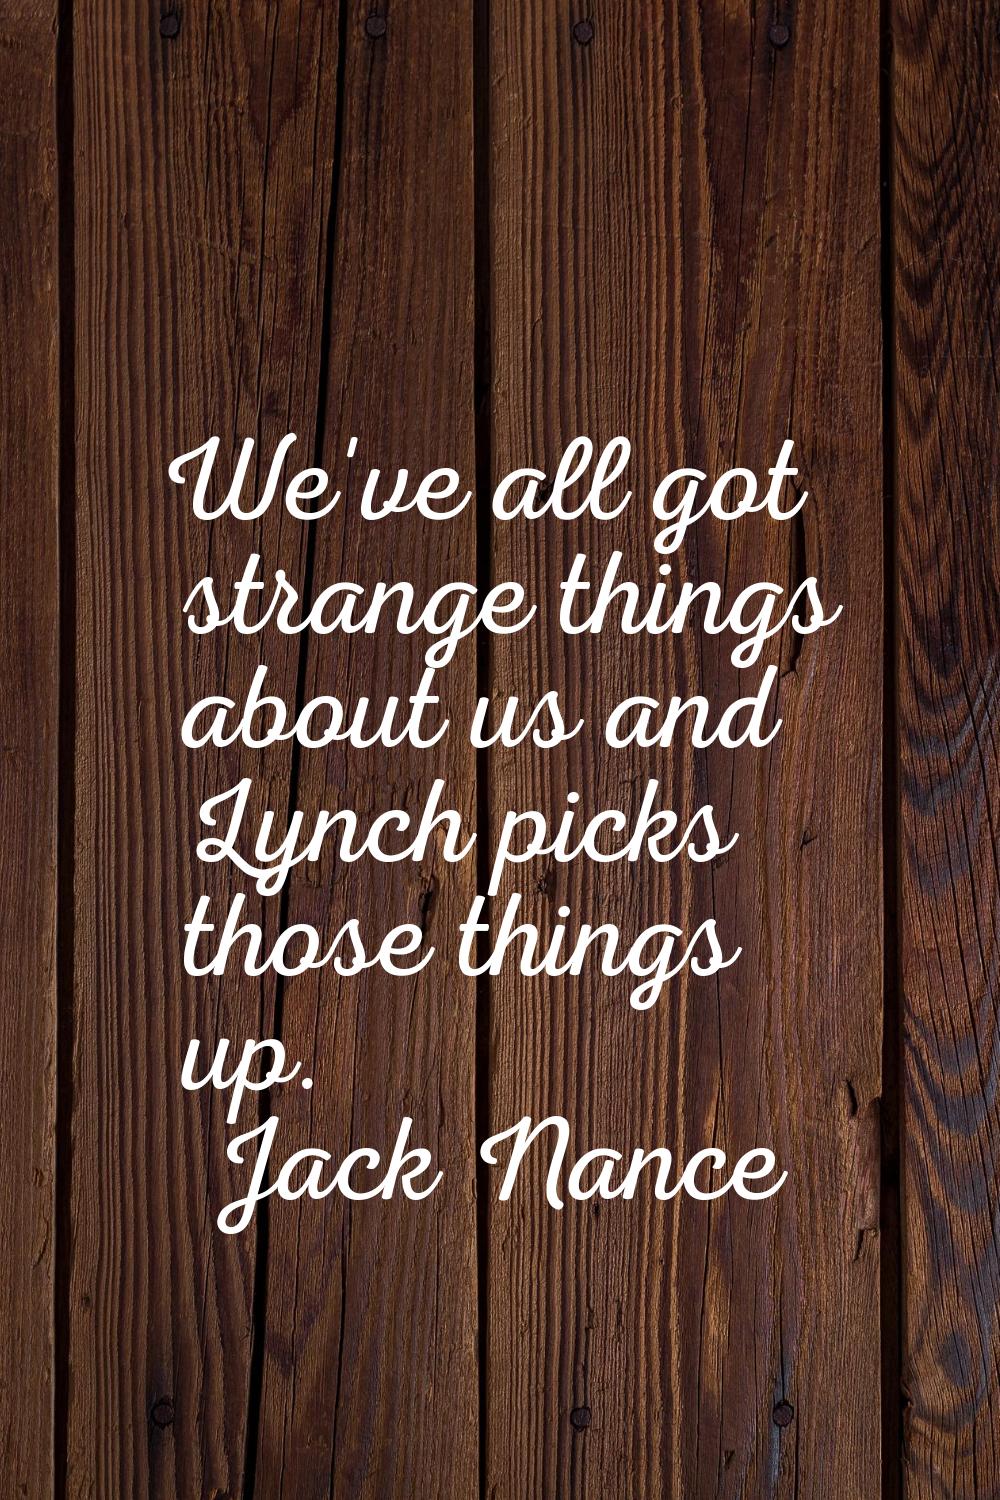 We've all got strange things about us and Lynch picks those things up.